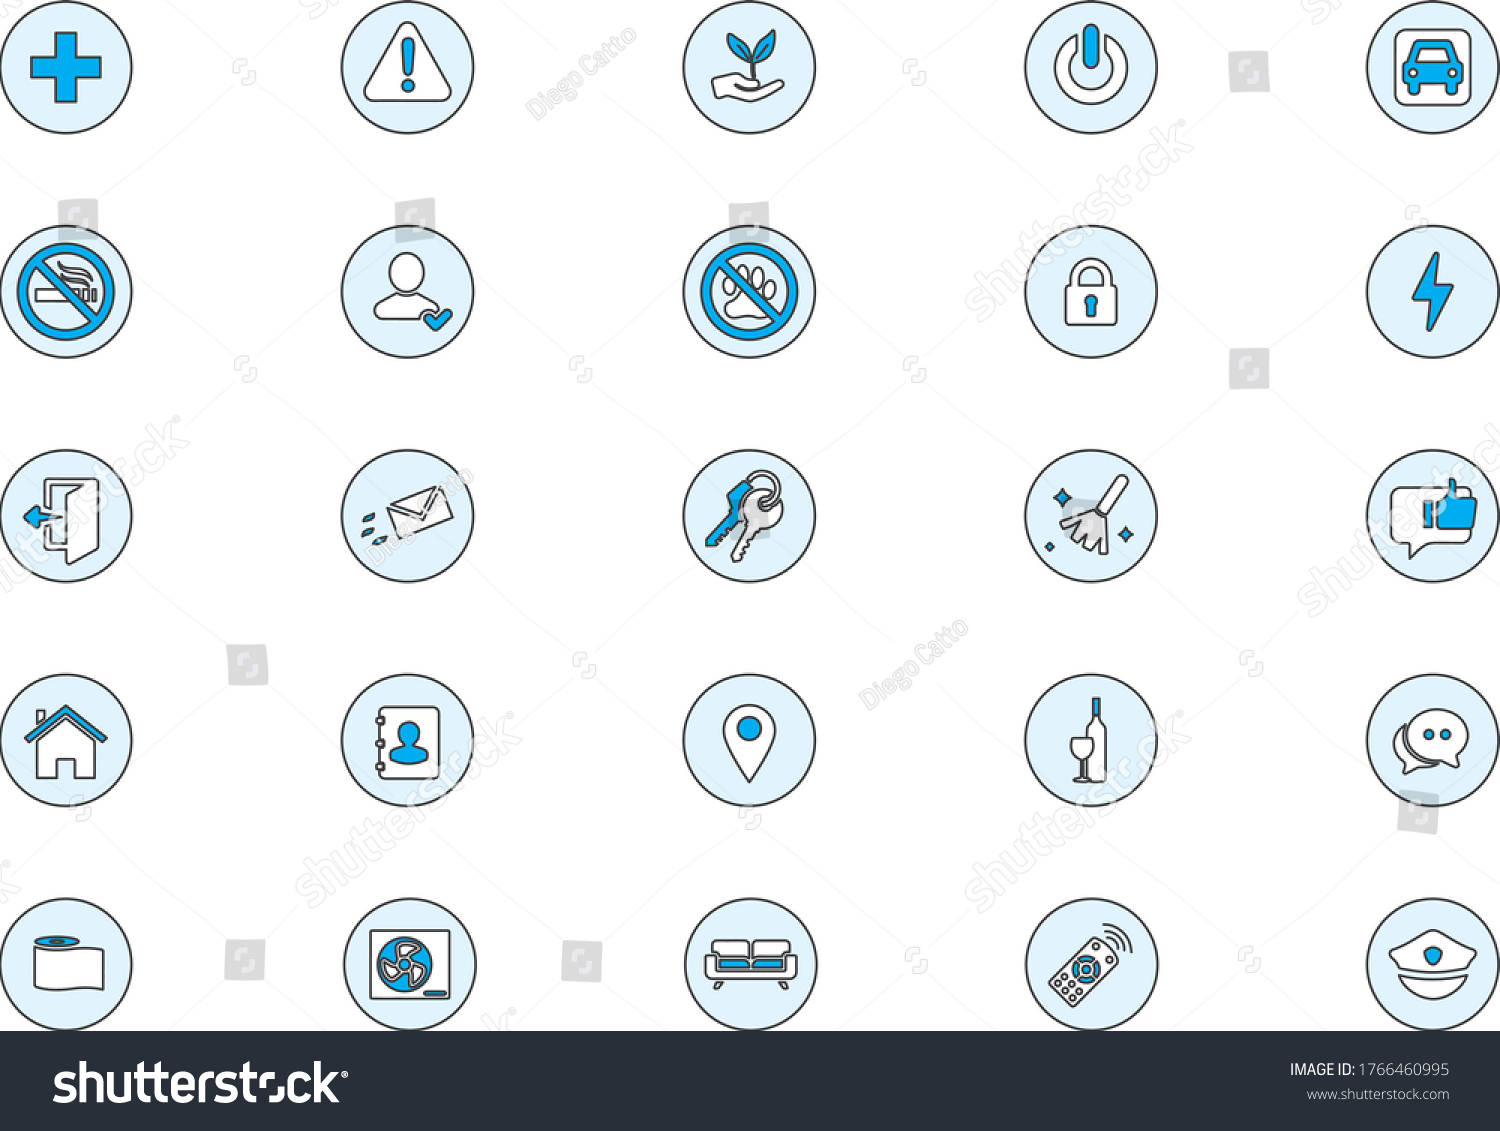 SVG of Set of icons for Hosting Vacation House - flat design vector svg